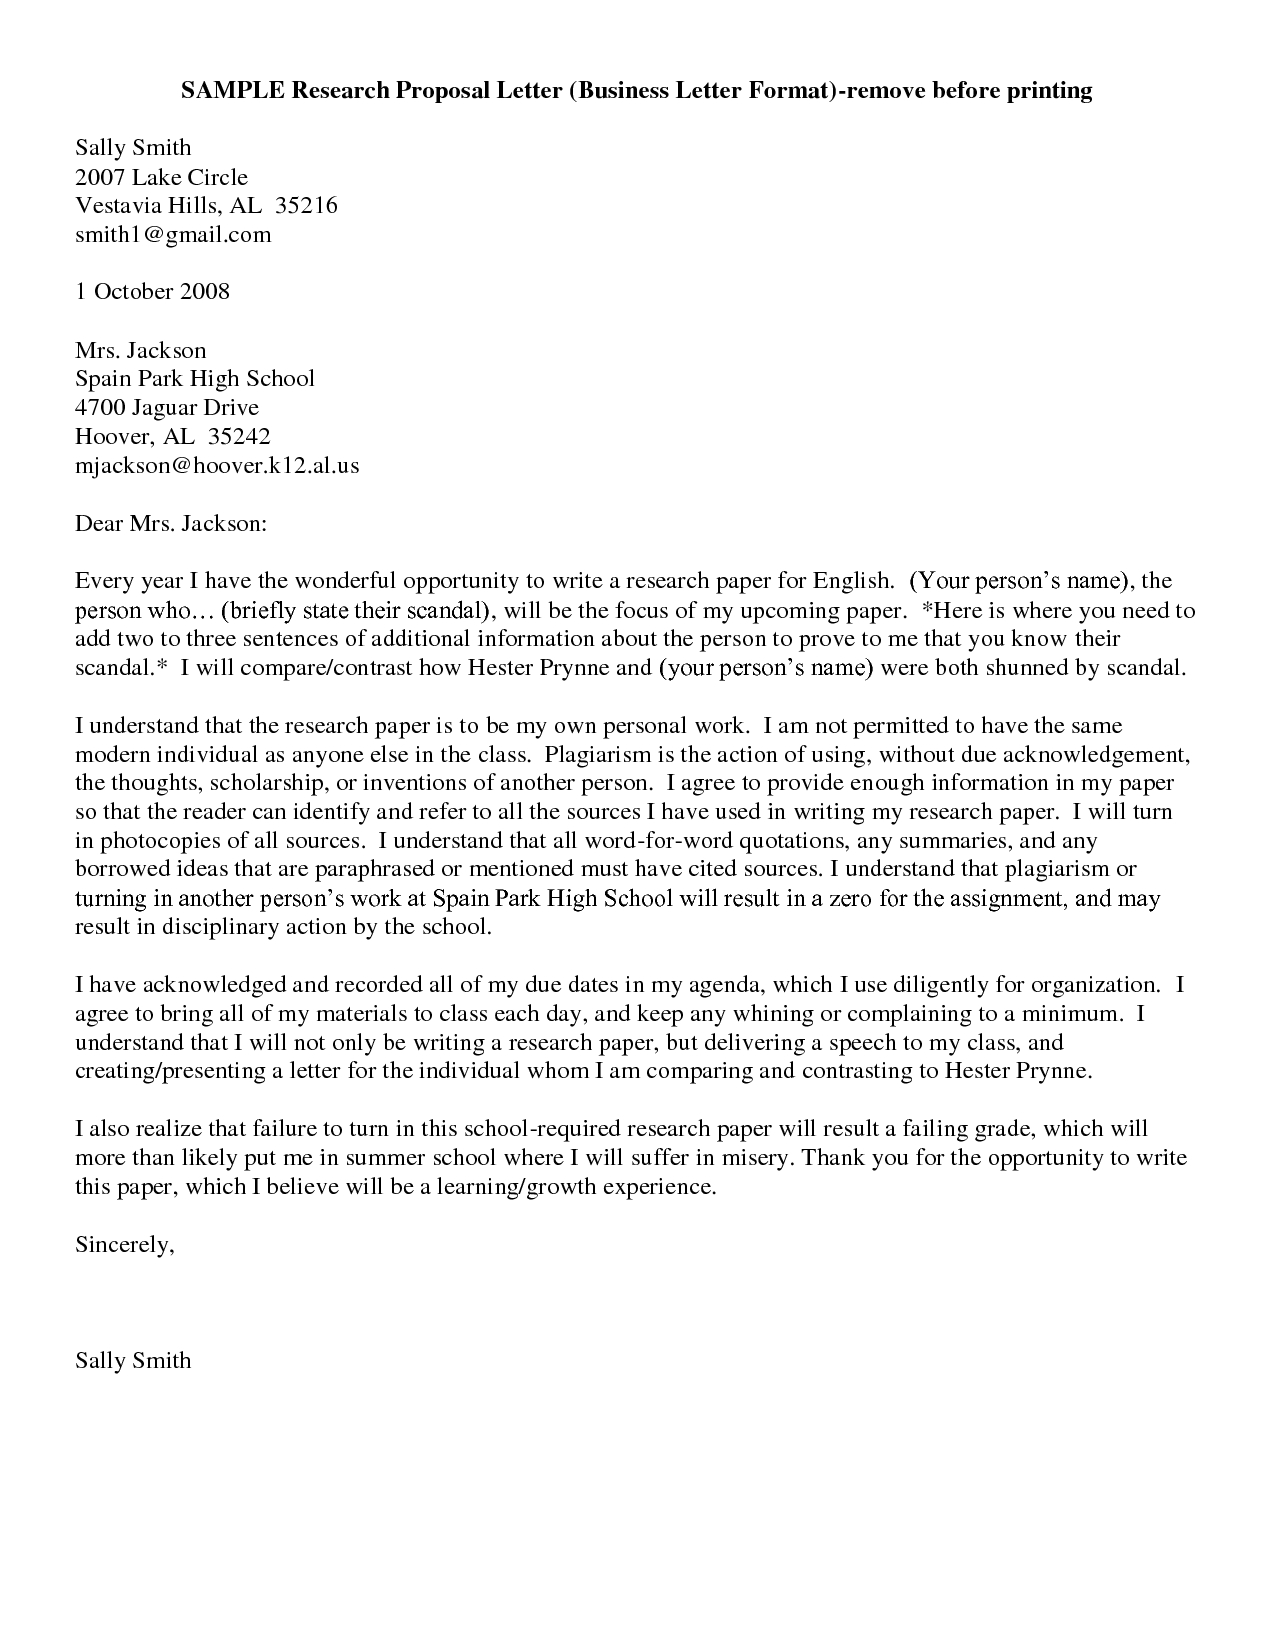 Business Letter Template On Microsoft Word | Sample Resume Throughout Microsoft Word Business Letter Template